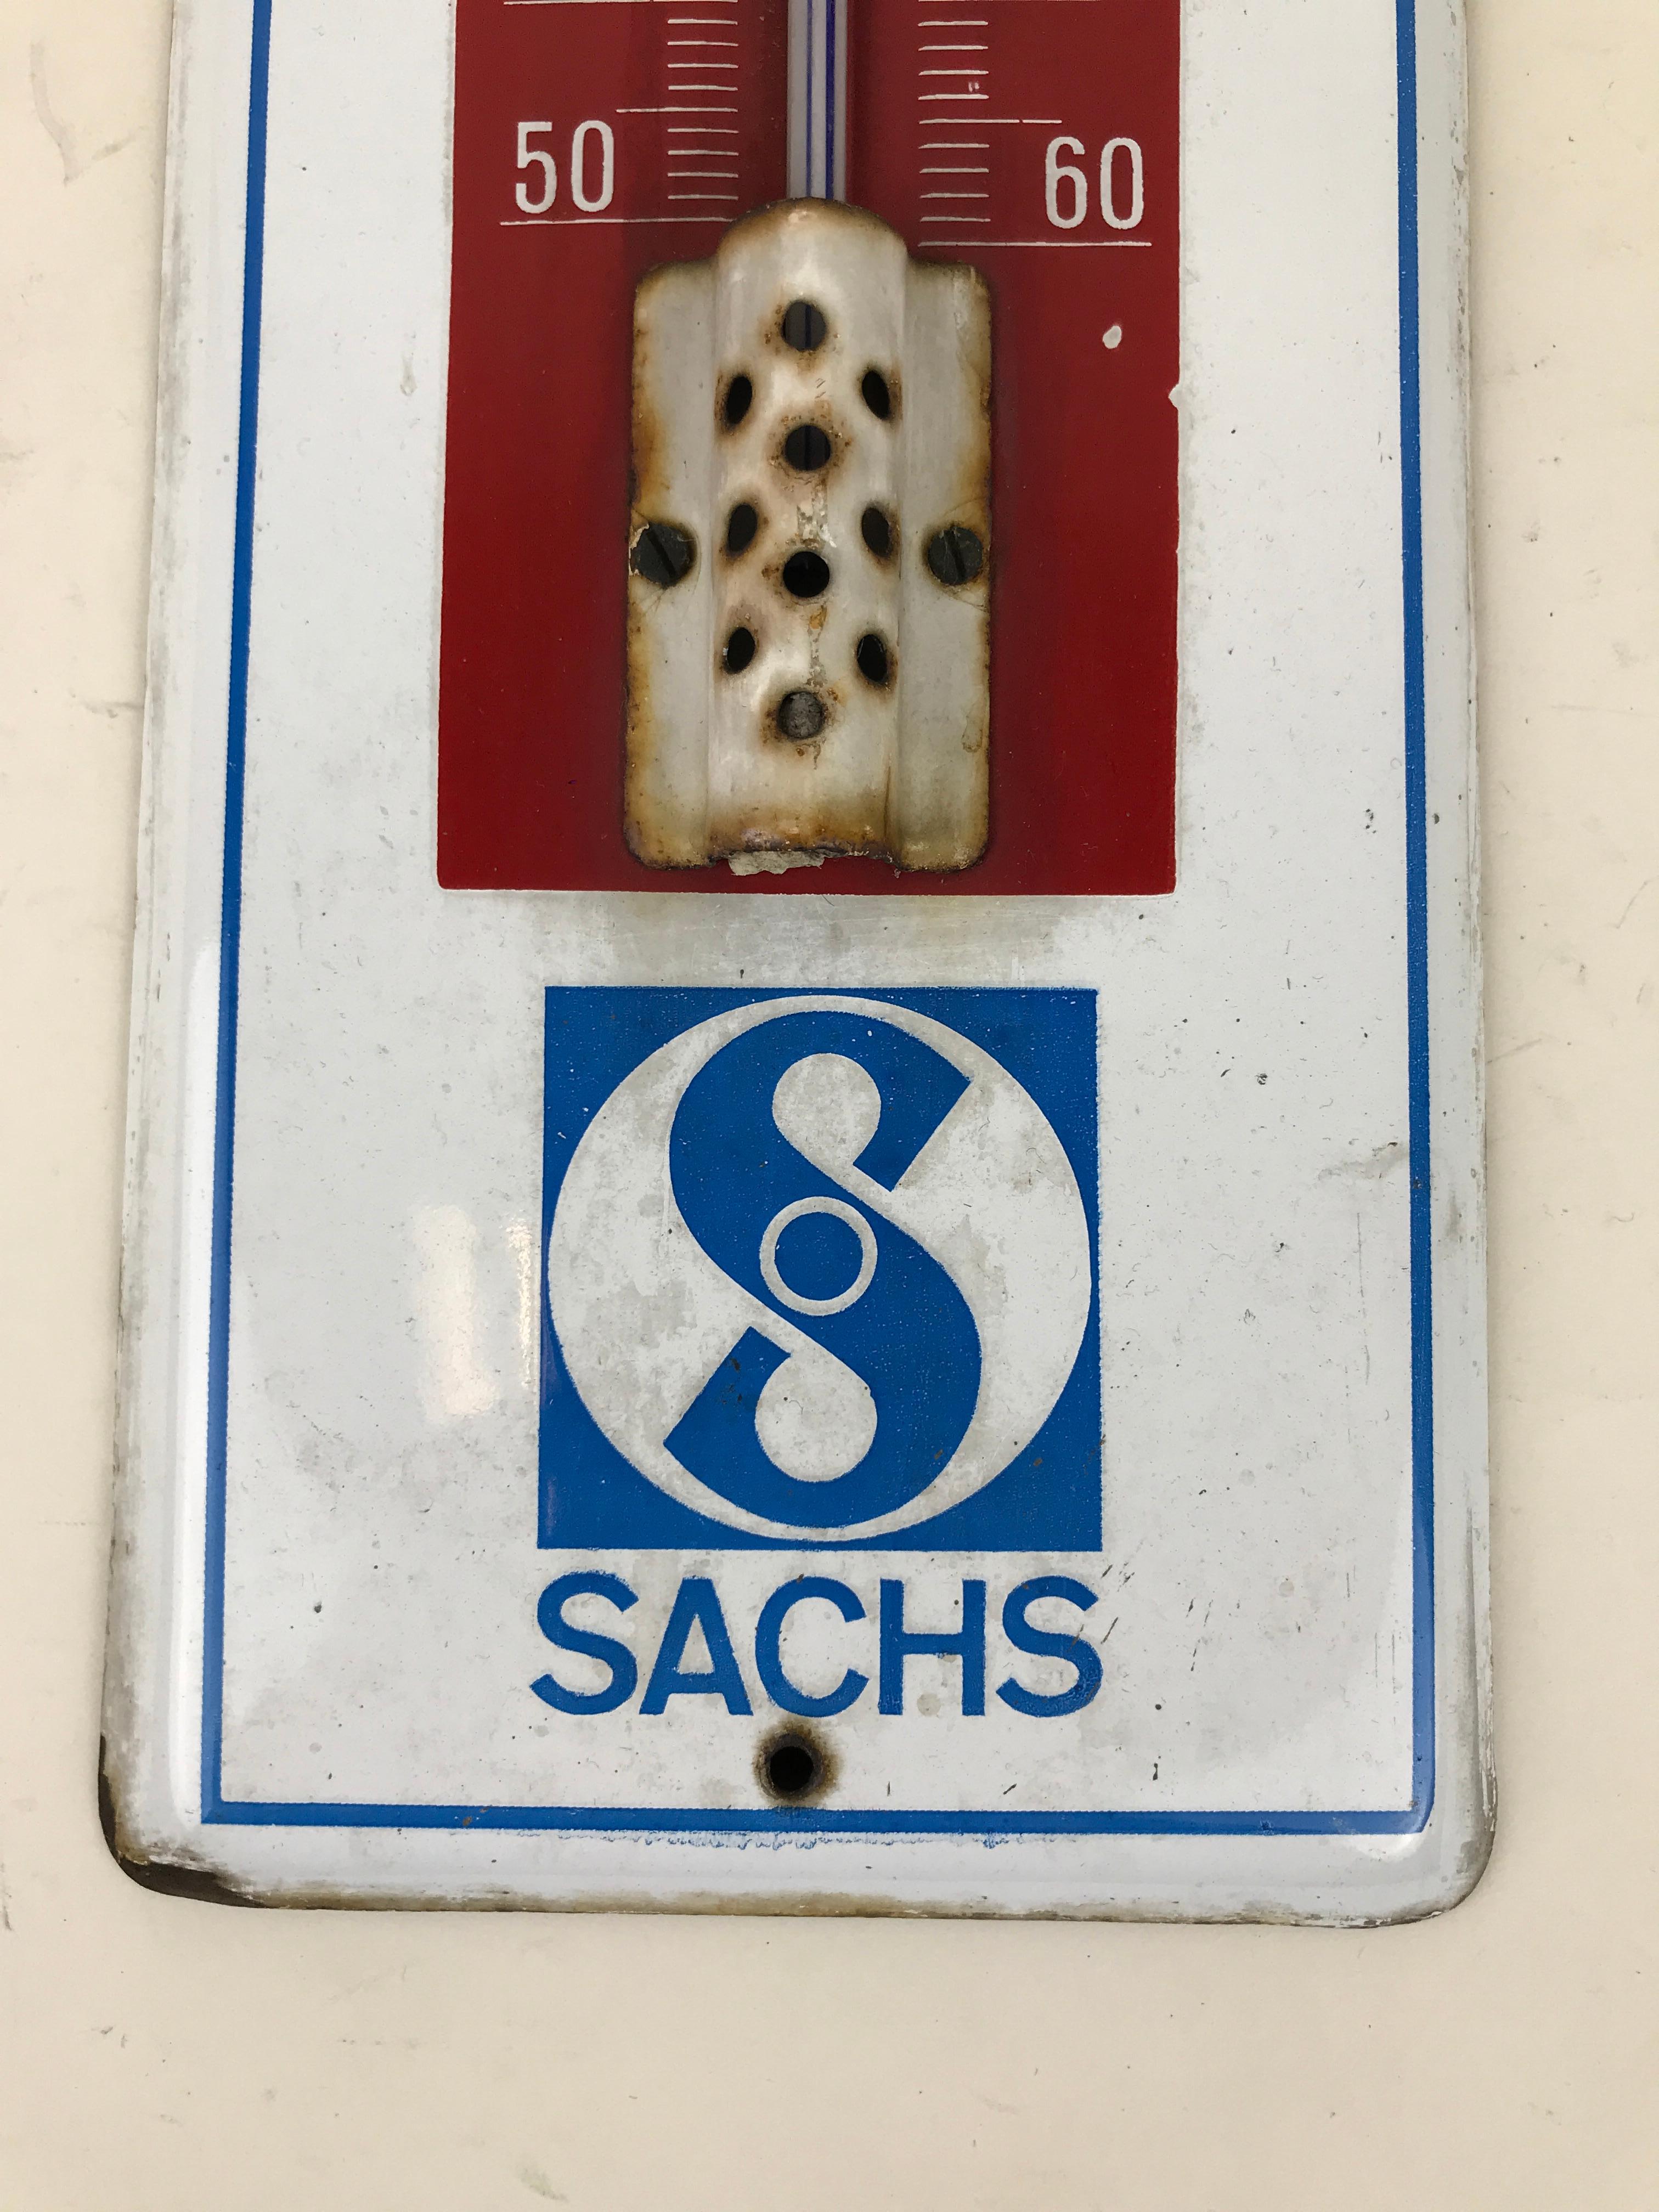 Mid-Century Modern 1950s Vintage Enamel Metal Advertising German Wall Thermometer by Sachs Engine For Sale